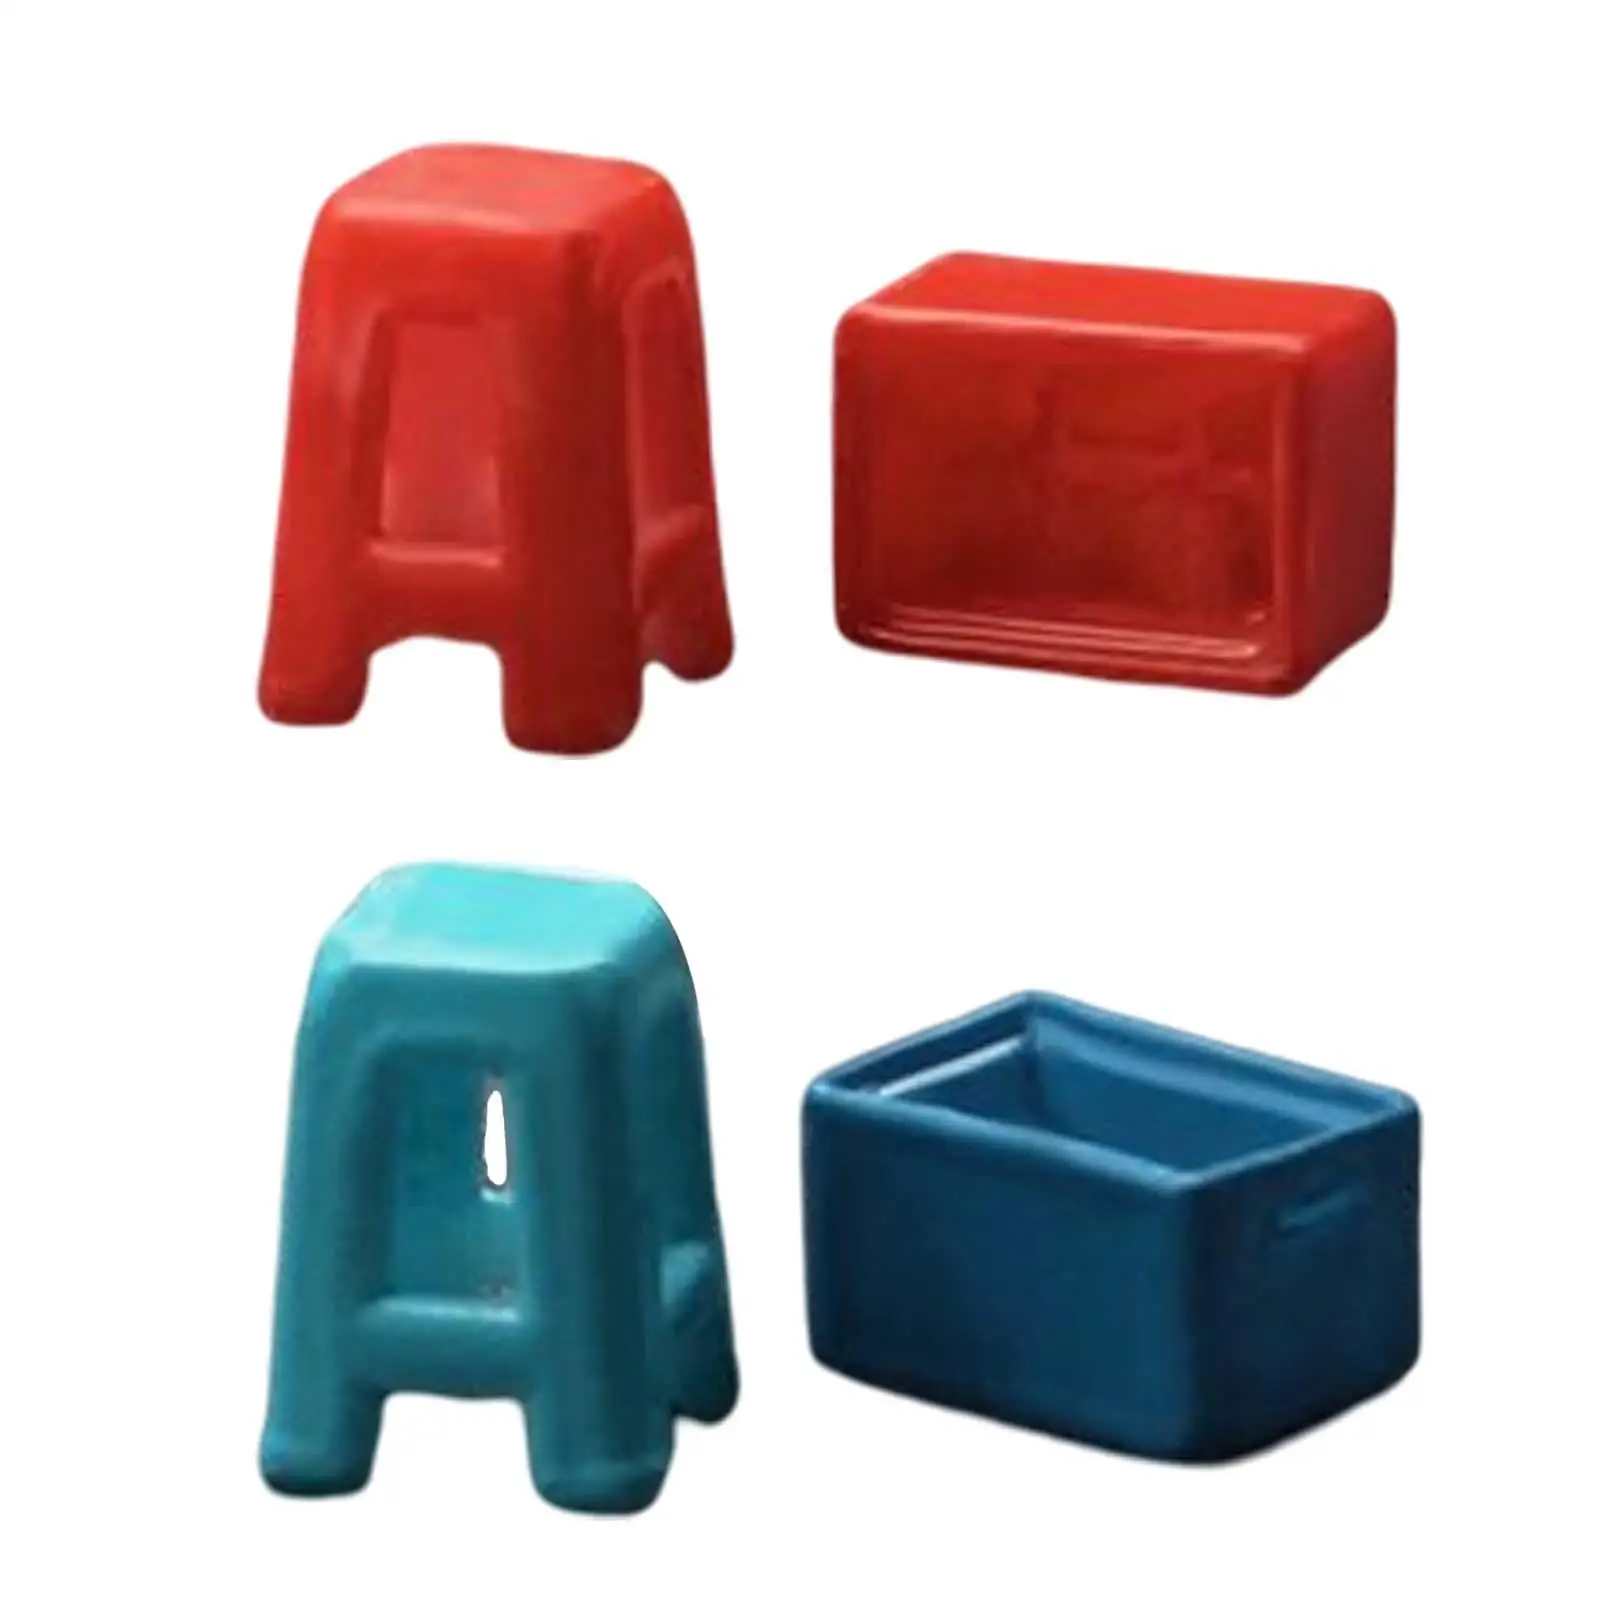 1/64 Scale Painted Stool 1/64 Tiny Chairs for Diorama Layout Dollhouse Decor Desk Decor Miniature Scenes Decor Photography Props